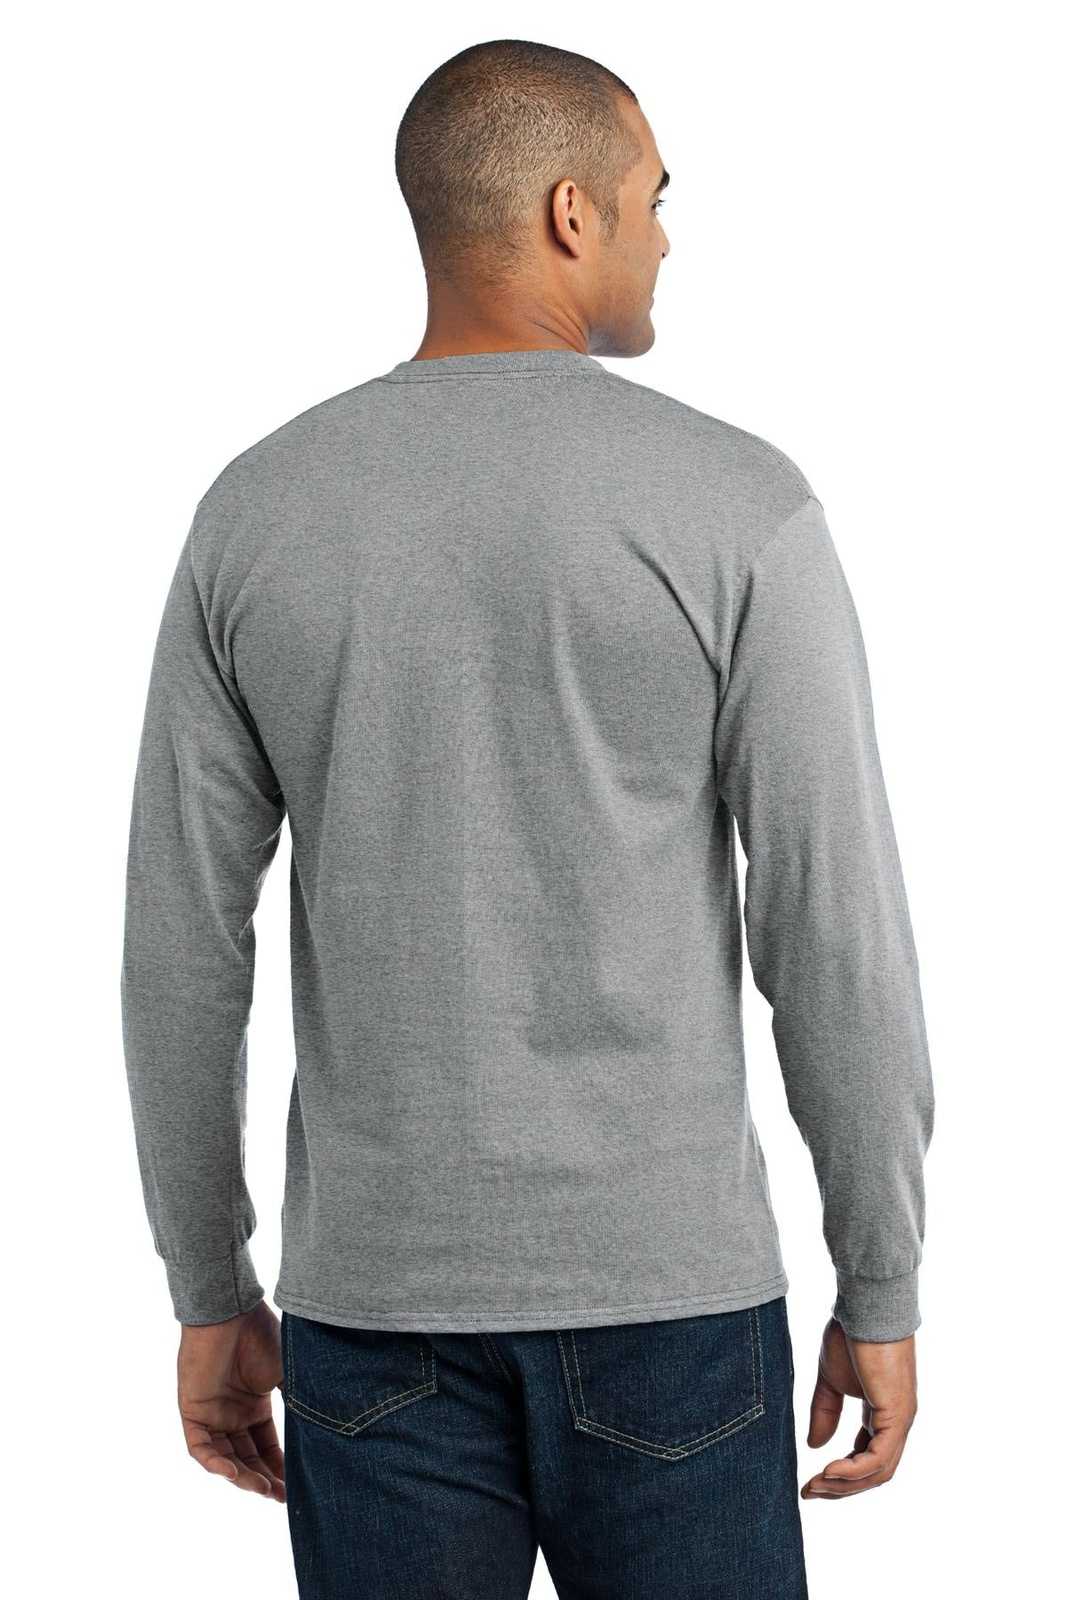 Port & Company PC55LS Long Sleeve Core Blend Tee - Athletic Heather - HIT a Double - 1